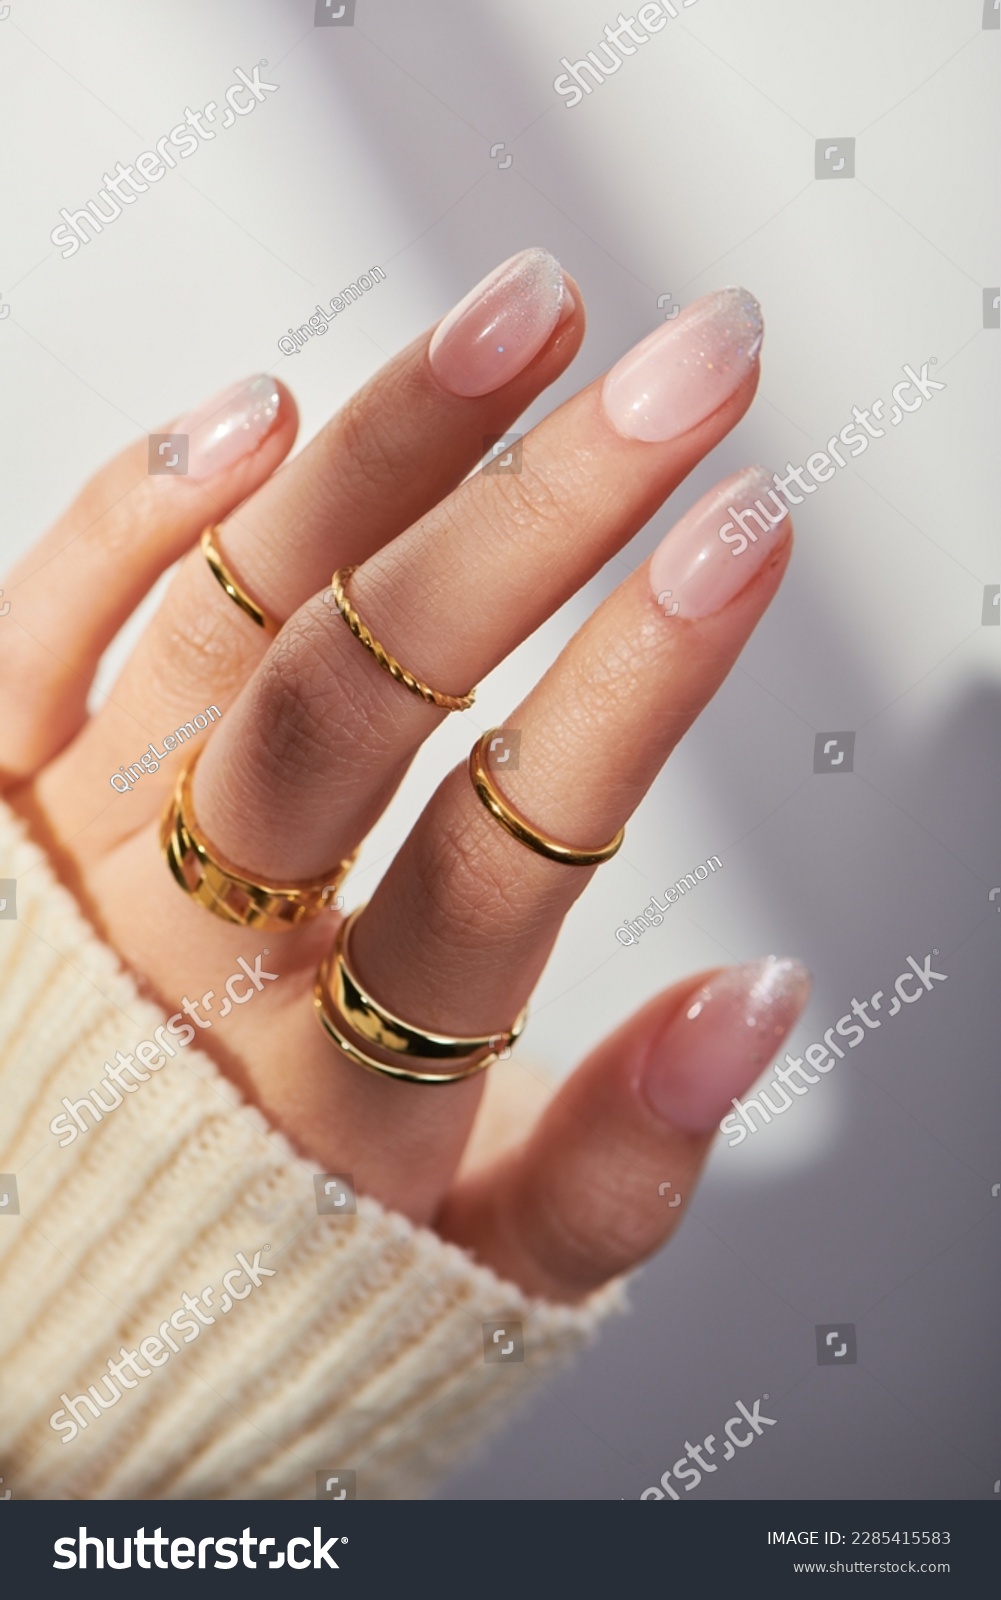 Female hands with rose nail design. Pink glitter nail polish manicure. Woman hands on white background.  #2285415583